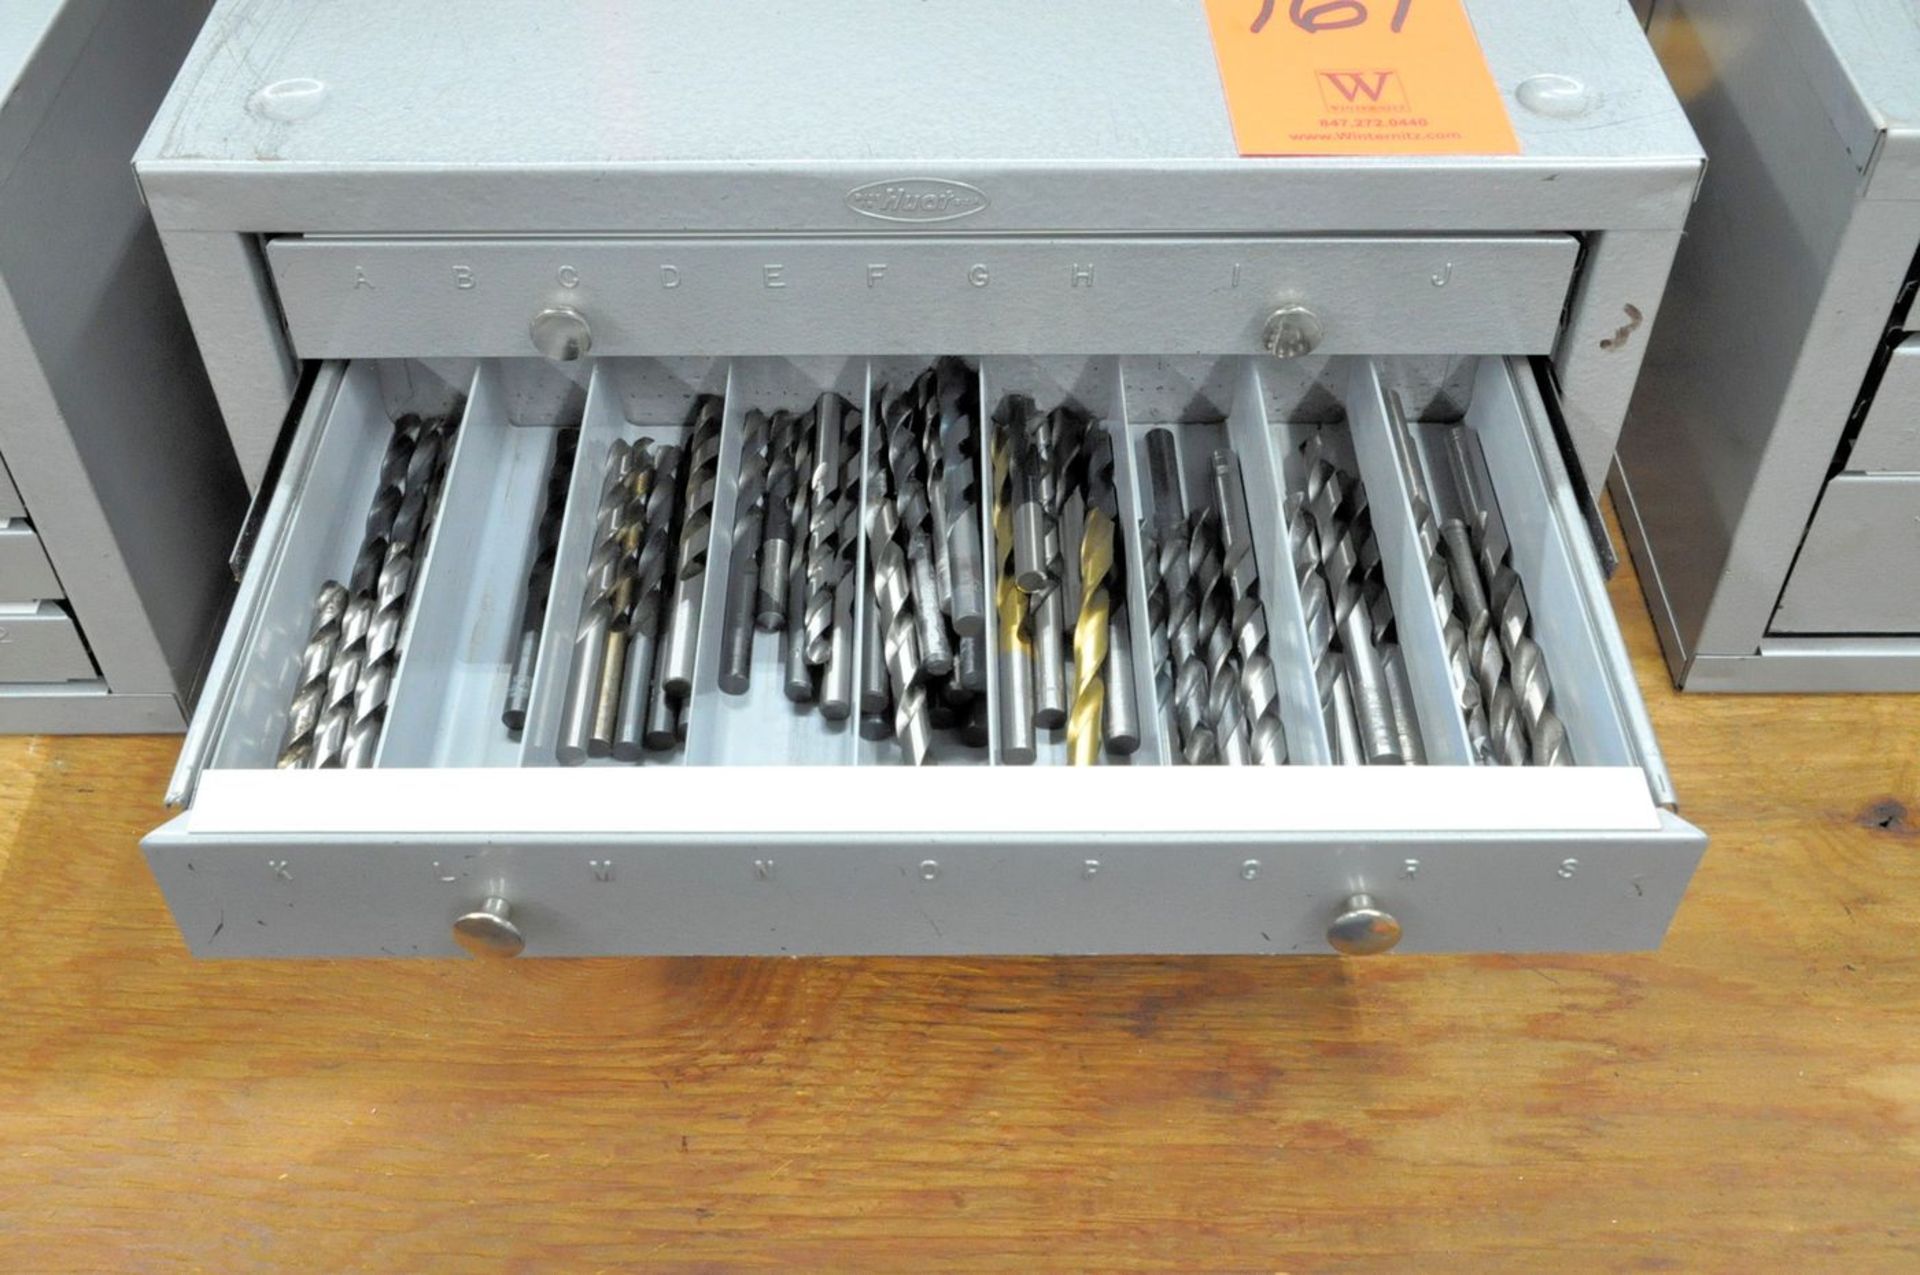 Huot 14-5/8"W X 7-1/2"D x 7-7/8"H 3-Drawer Index Cabinet with Drills - Image 3 of 4